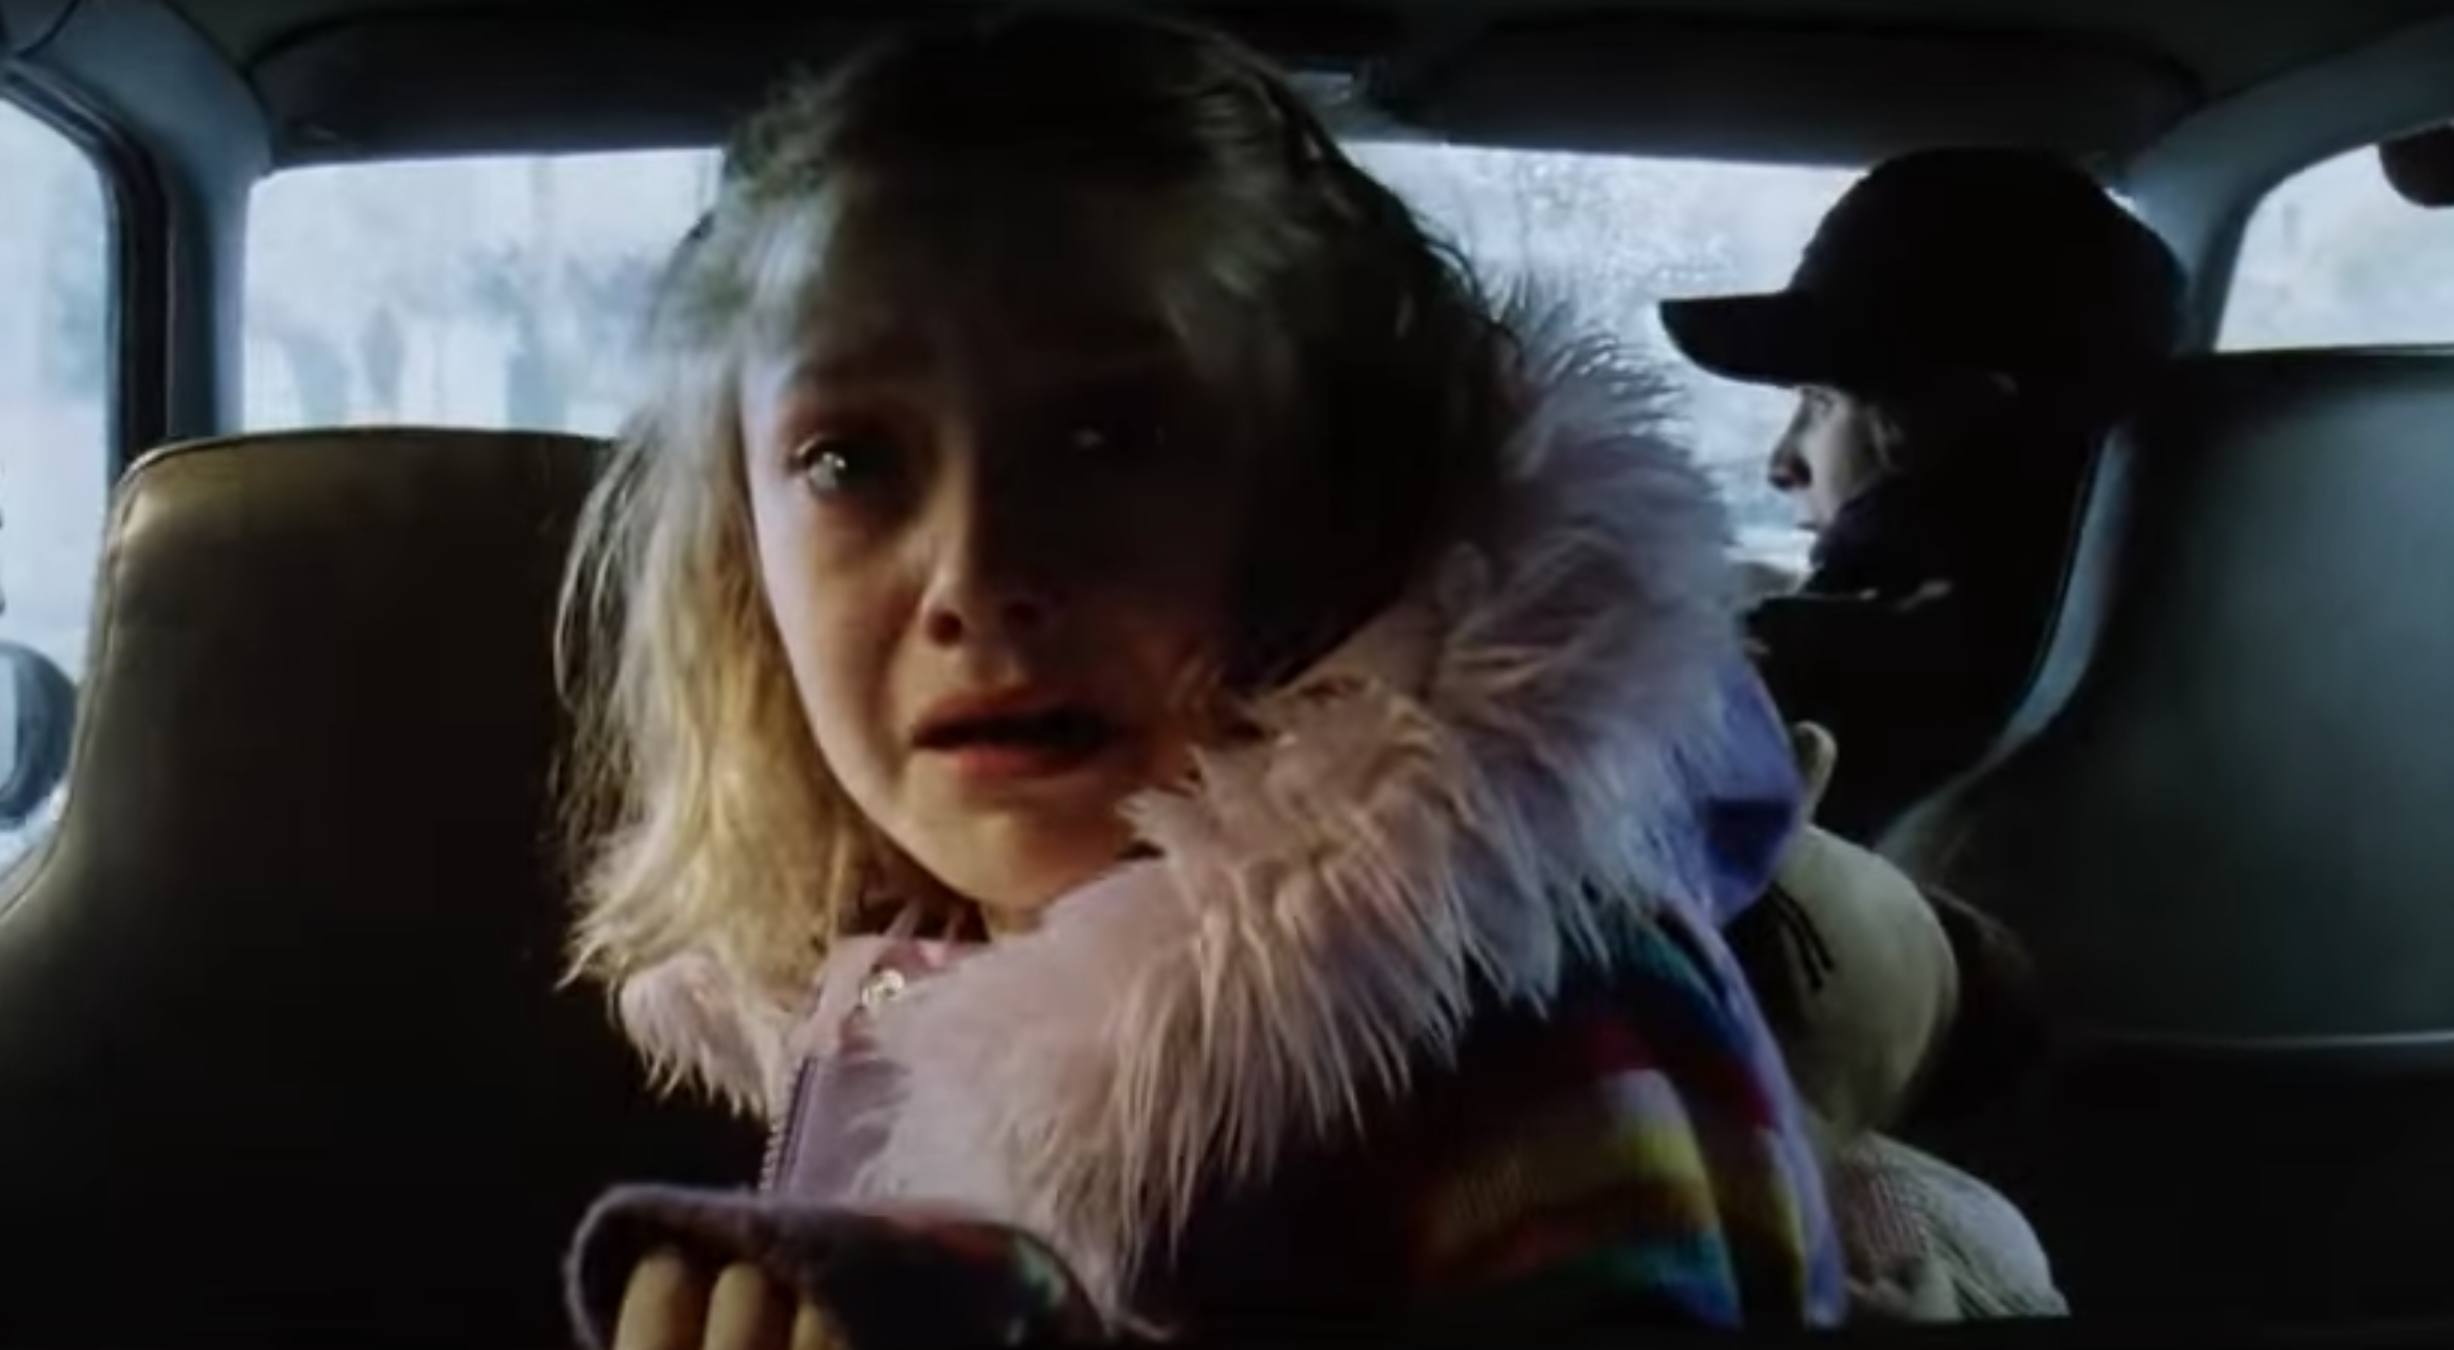 Dakota Fanning in the backseat of a car, looking frightened, in &quot;War of the Worlds.&quot;